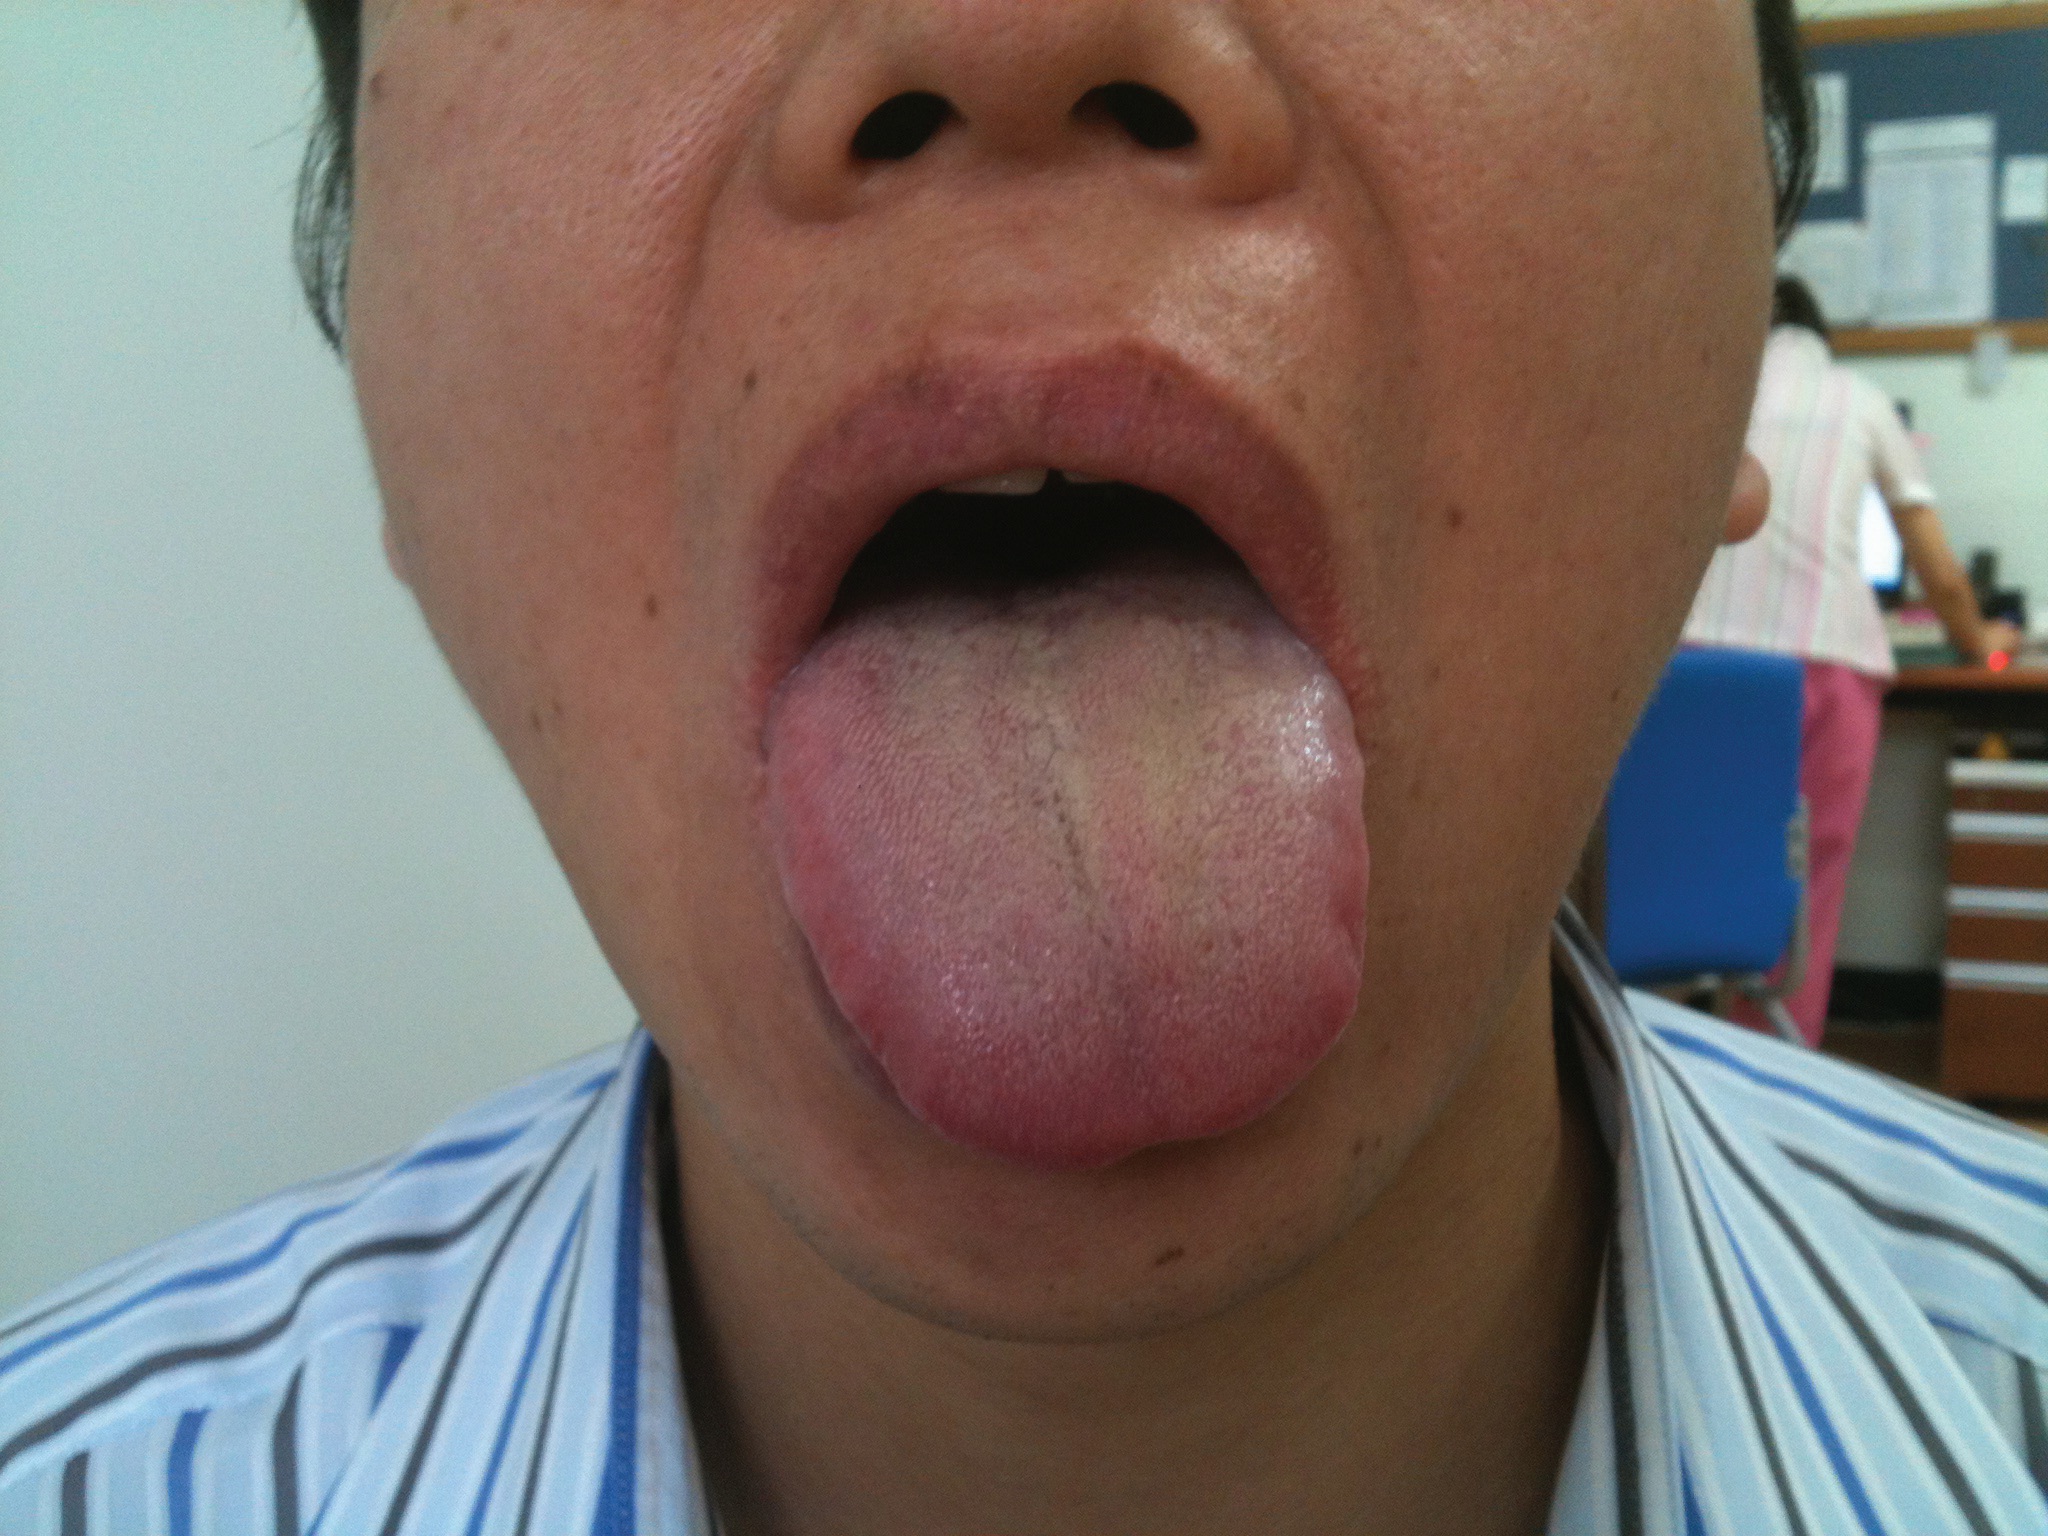 The tongue's deviation on protrusion on the third day of
					treatment. The left-sided deviation of the tongue was
					slightly improved on the third day of treatment